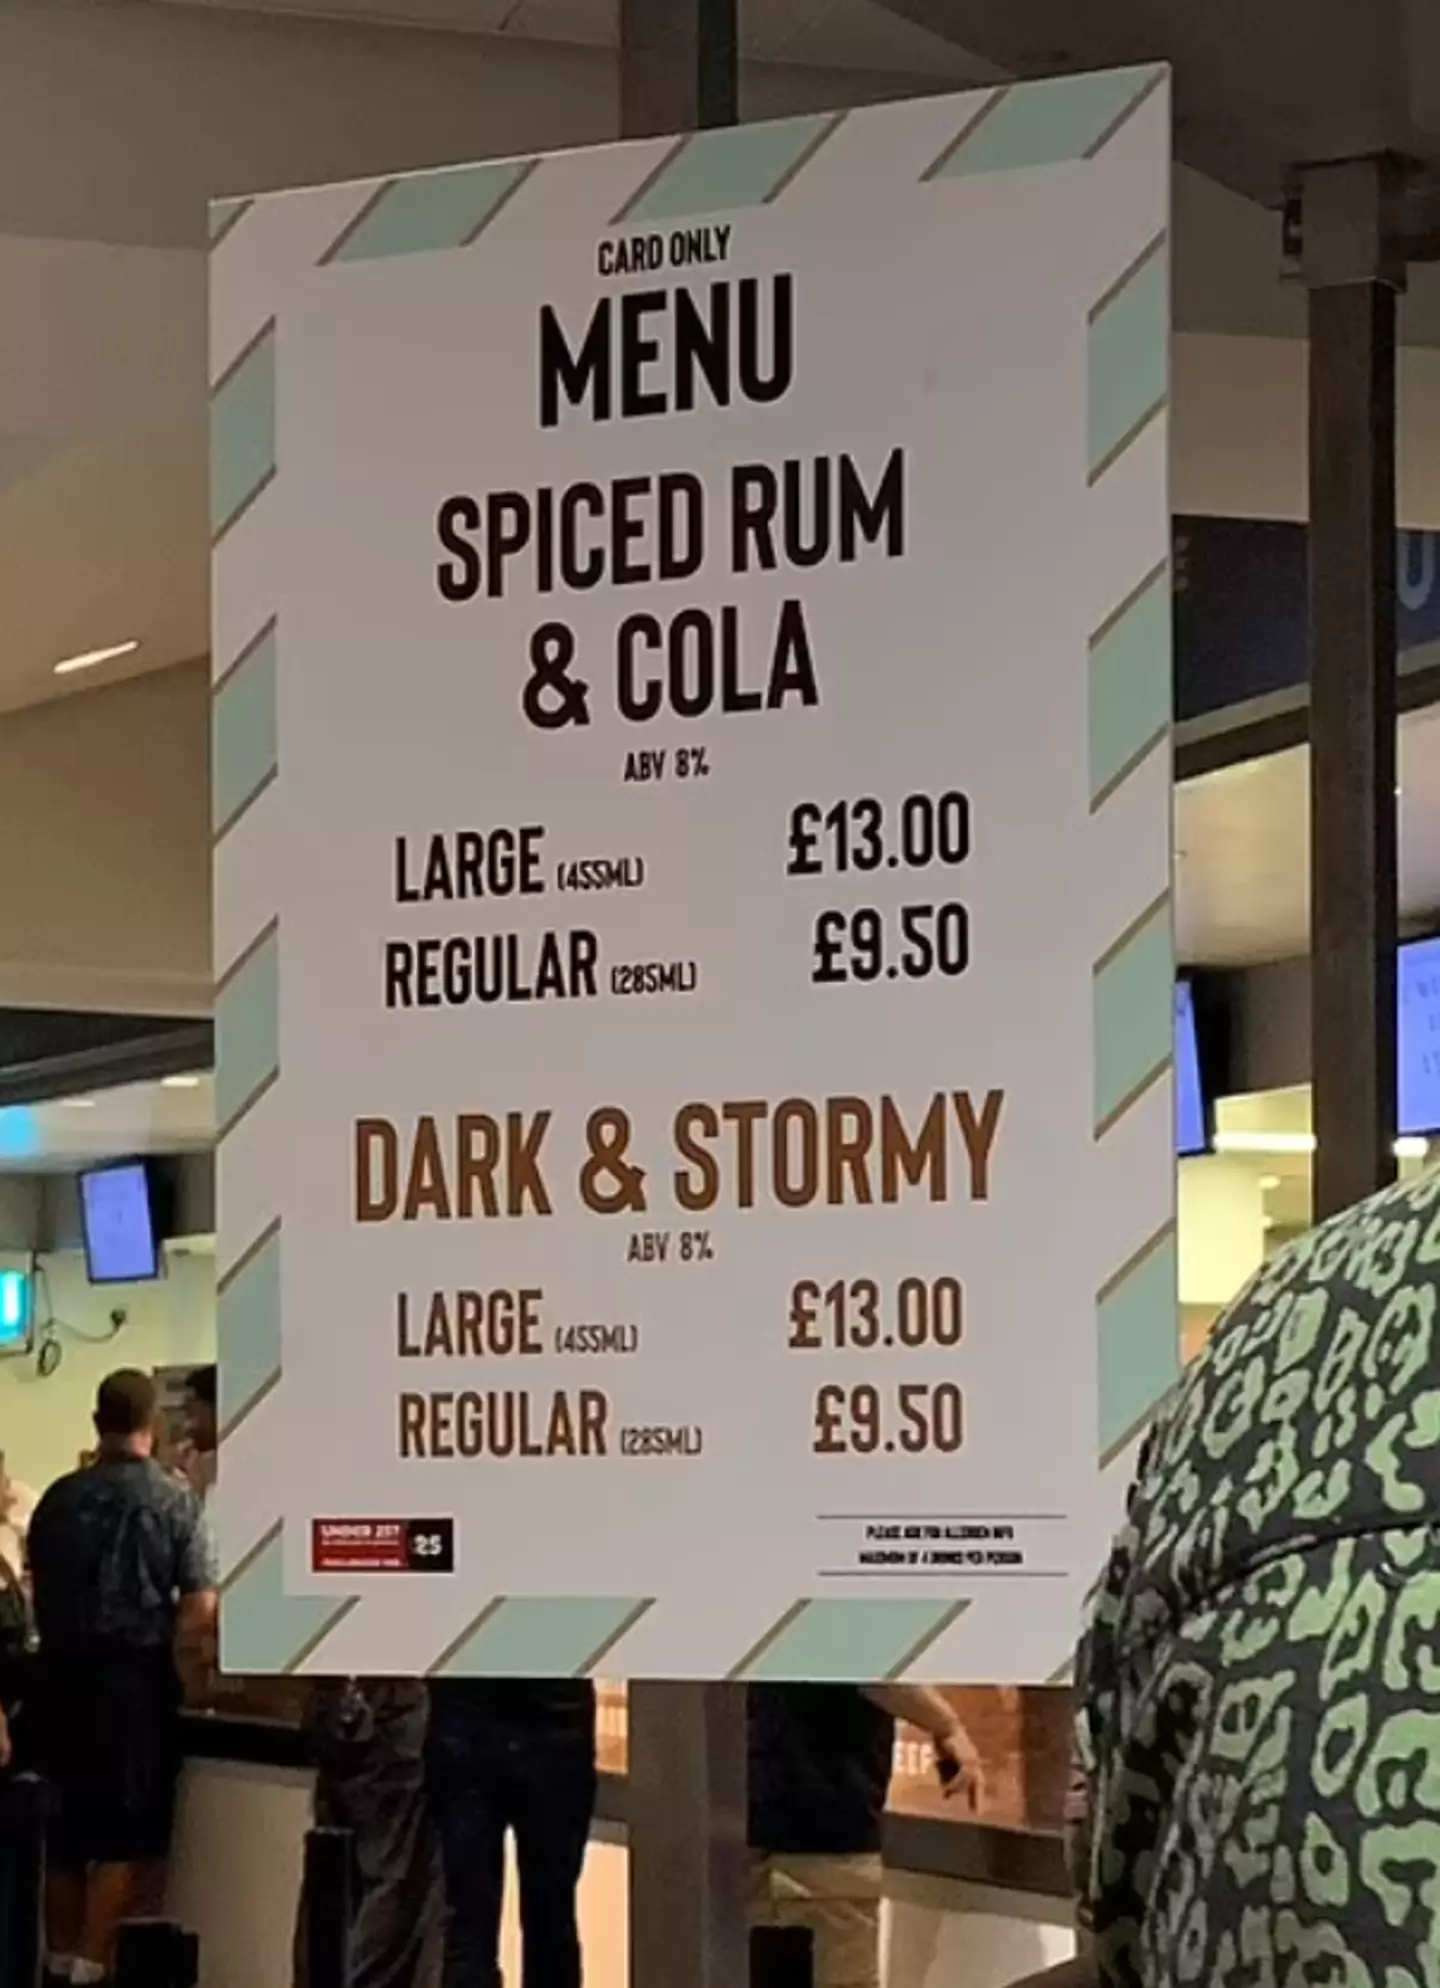 Some fans said they'd be staying sober to avoid the prices.